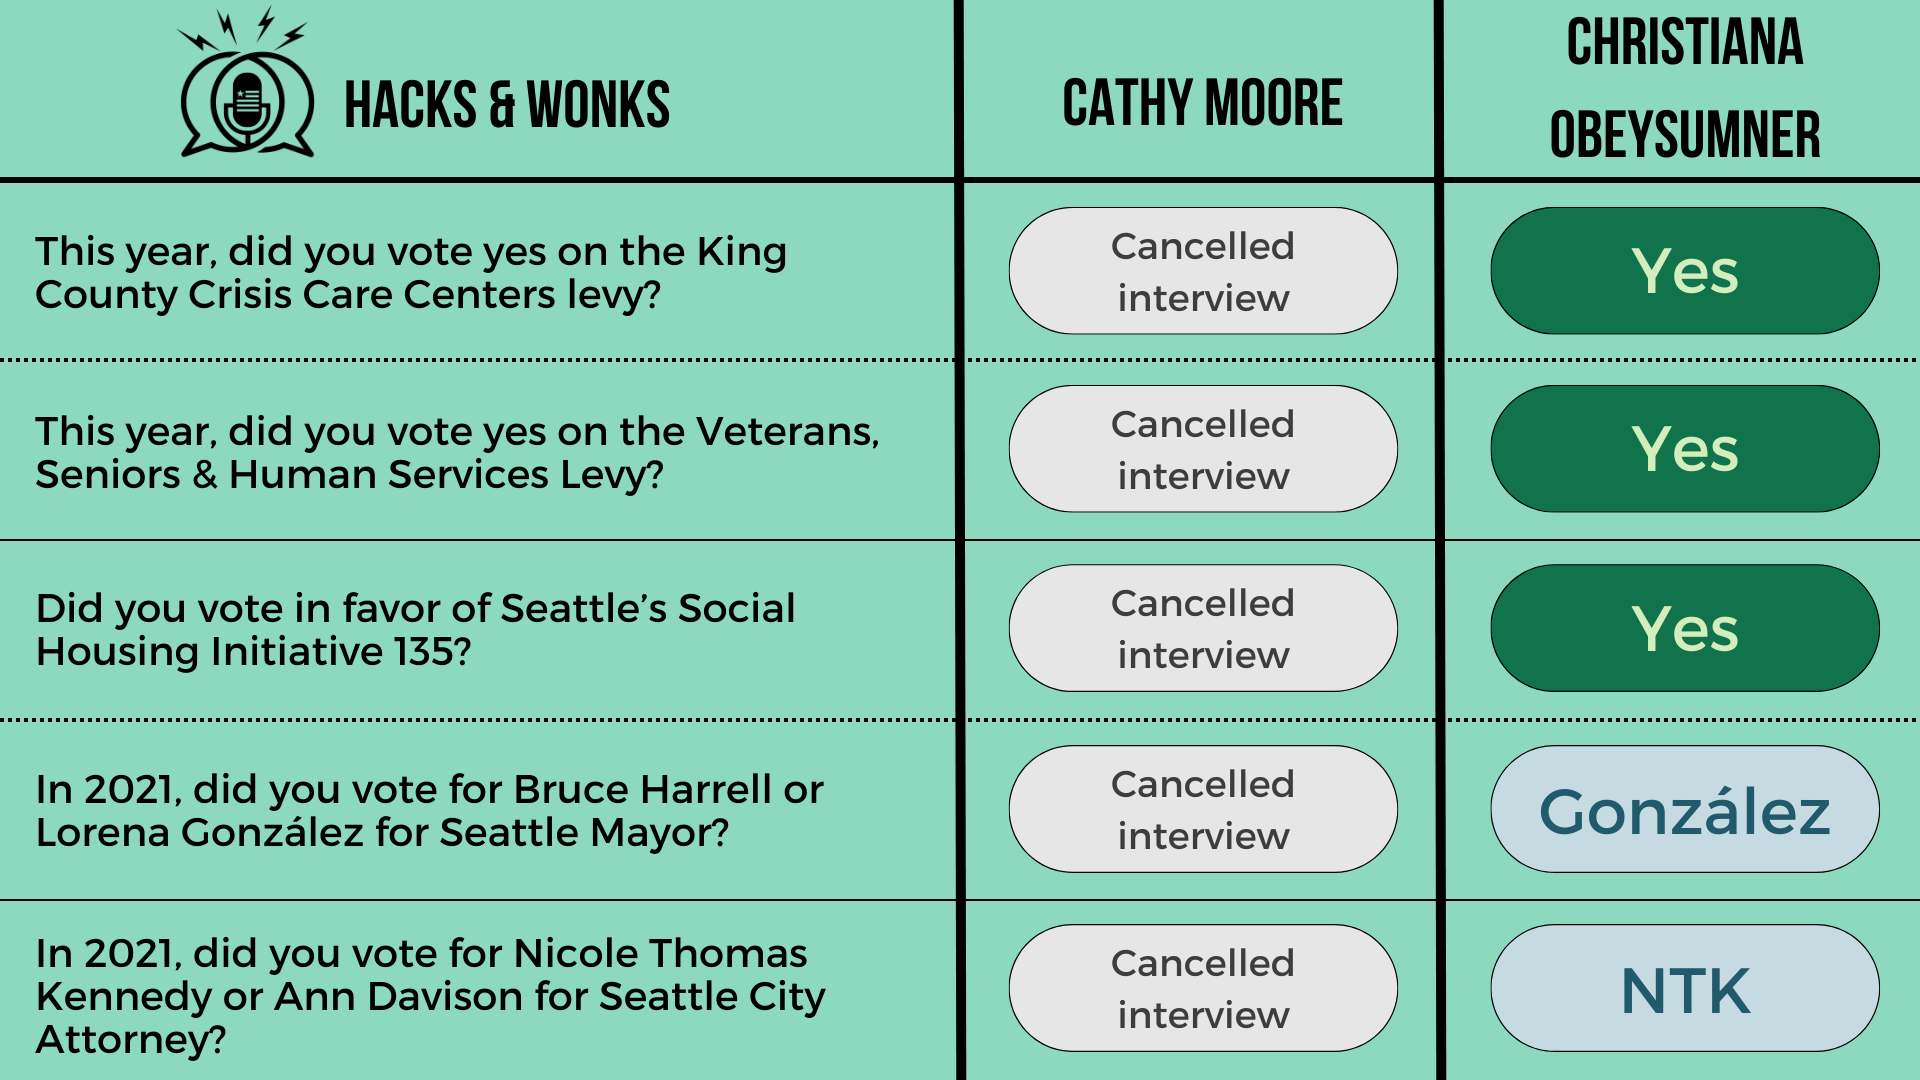 Q: This year, did you vote yes on the King County Crisis Care Centers levy? Cathy Moore: Cancelled interview, ChrisTiana ObeySumner: Yes  Q: This year, did you vote yes on the Veterans, Seniors & Human Services Levy? Cathy Moore: Cancelled interview,